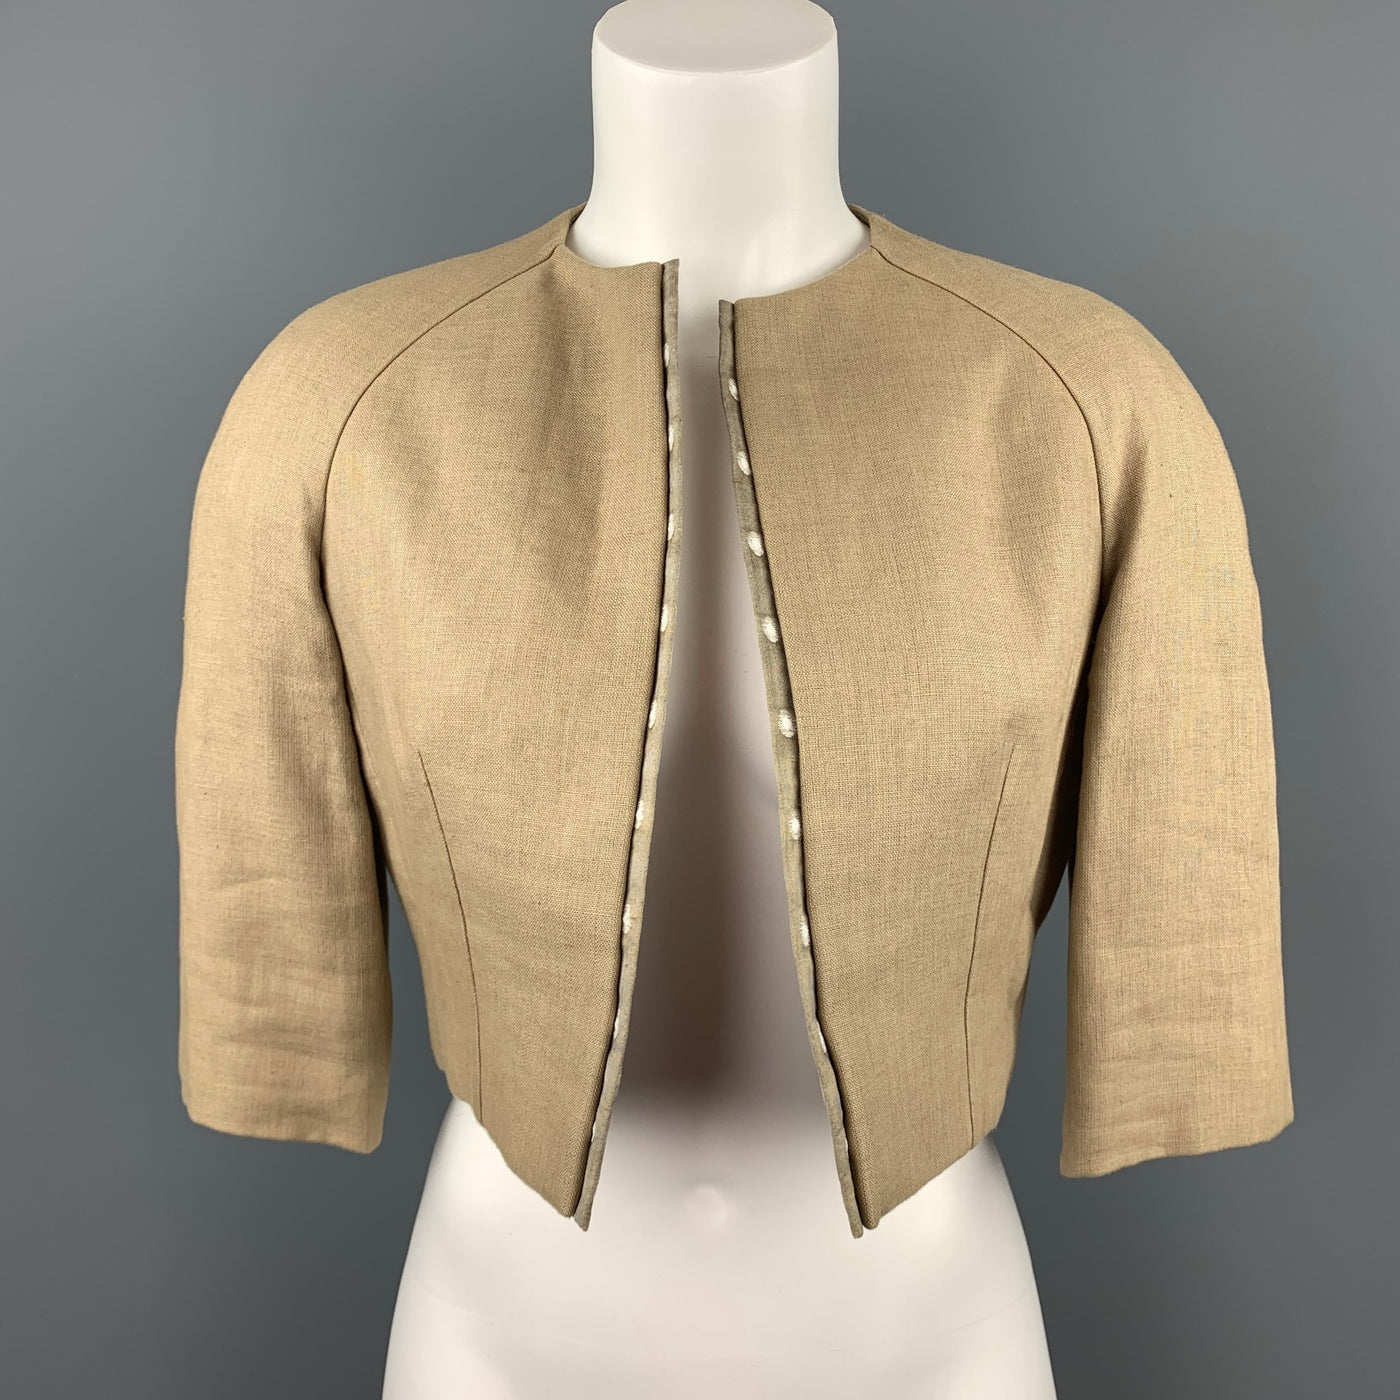 BILL BLASS for SAKS FIFTH AVENUE Size 6 Beige Textured Cropped Open Front Jacket